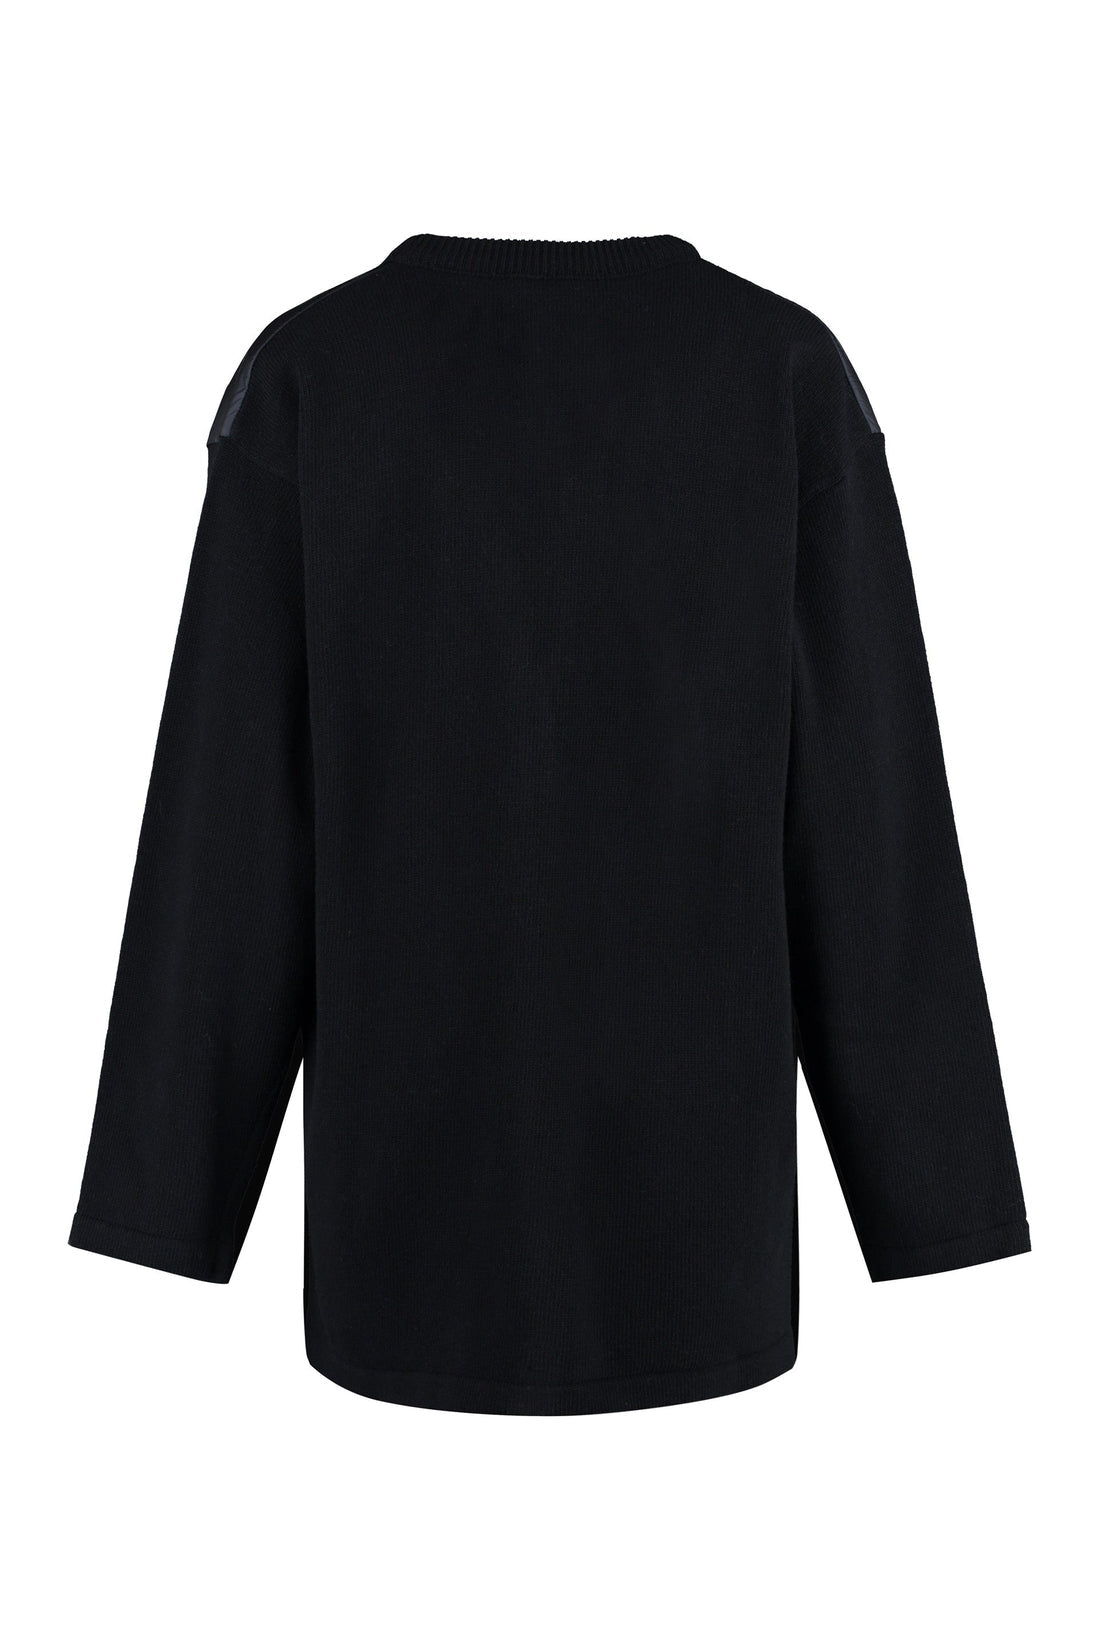 Aspesi-OUTLET-SALE-Cardigan with padded front panel-ARCHIVIST